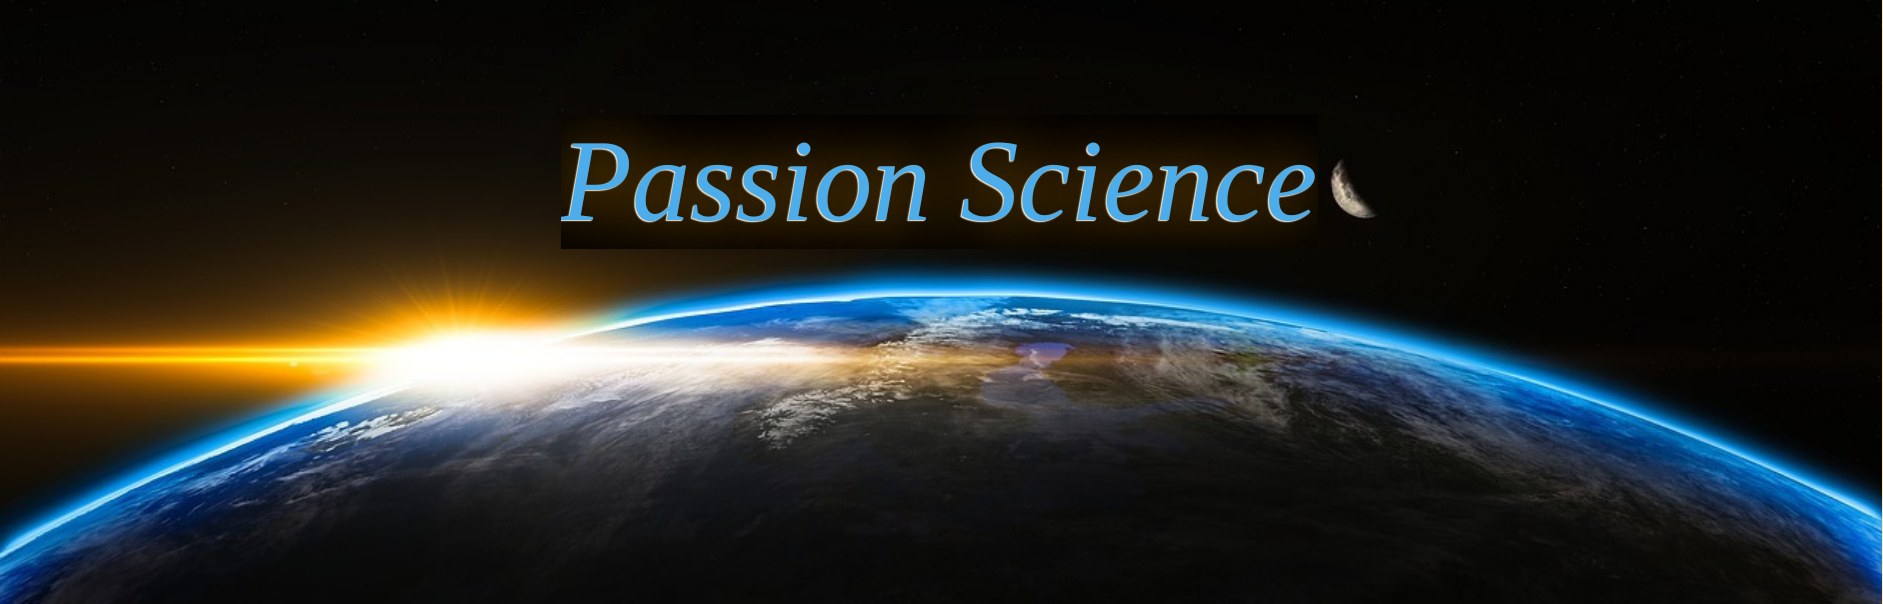 Passion Science